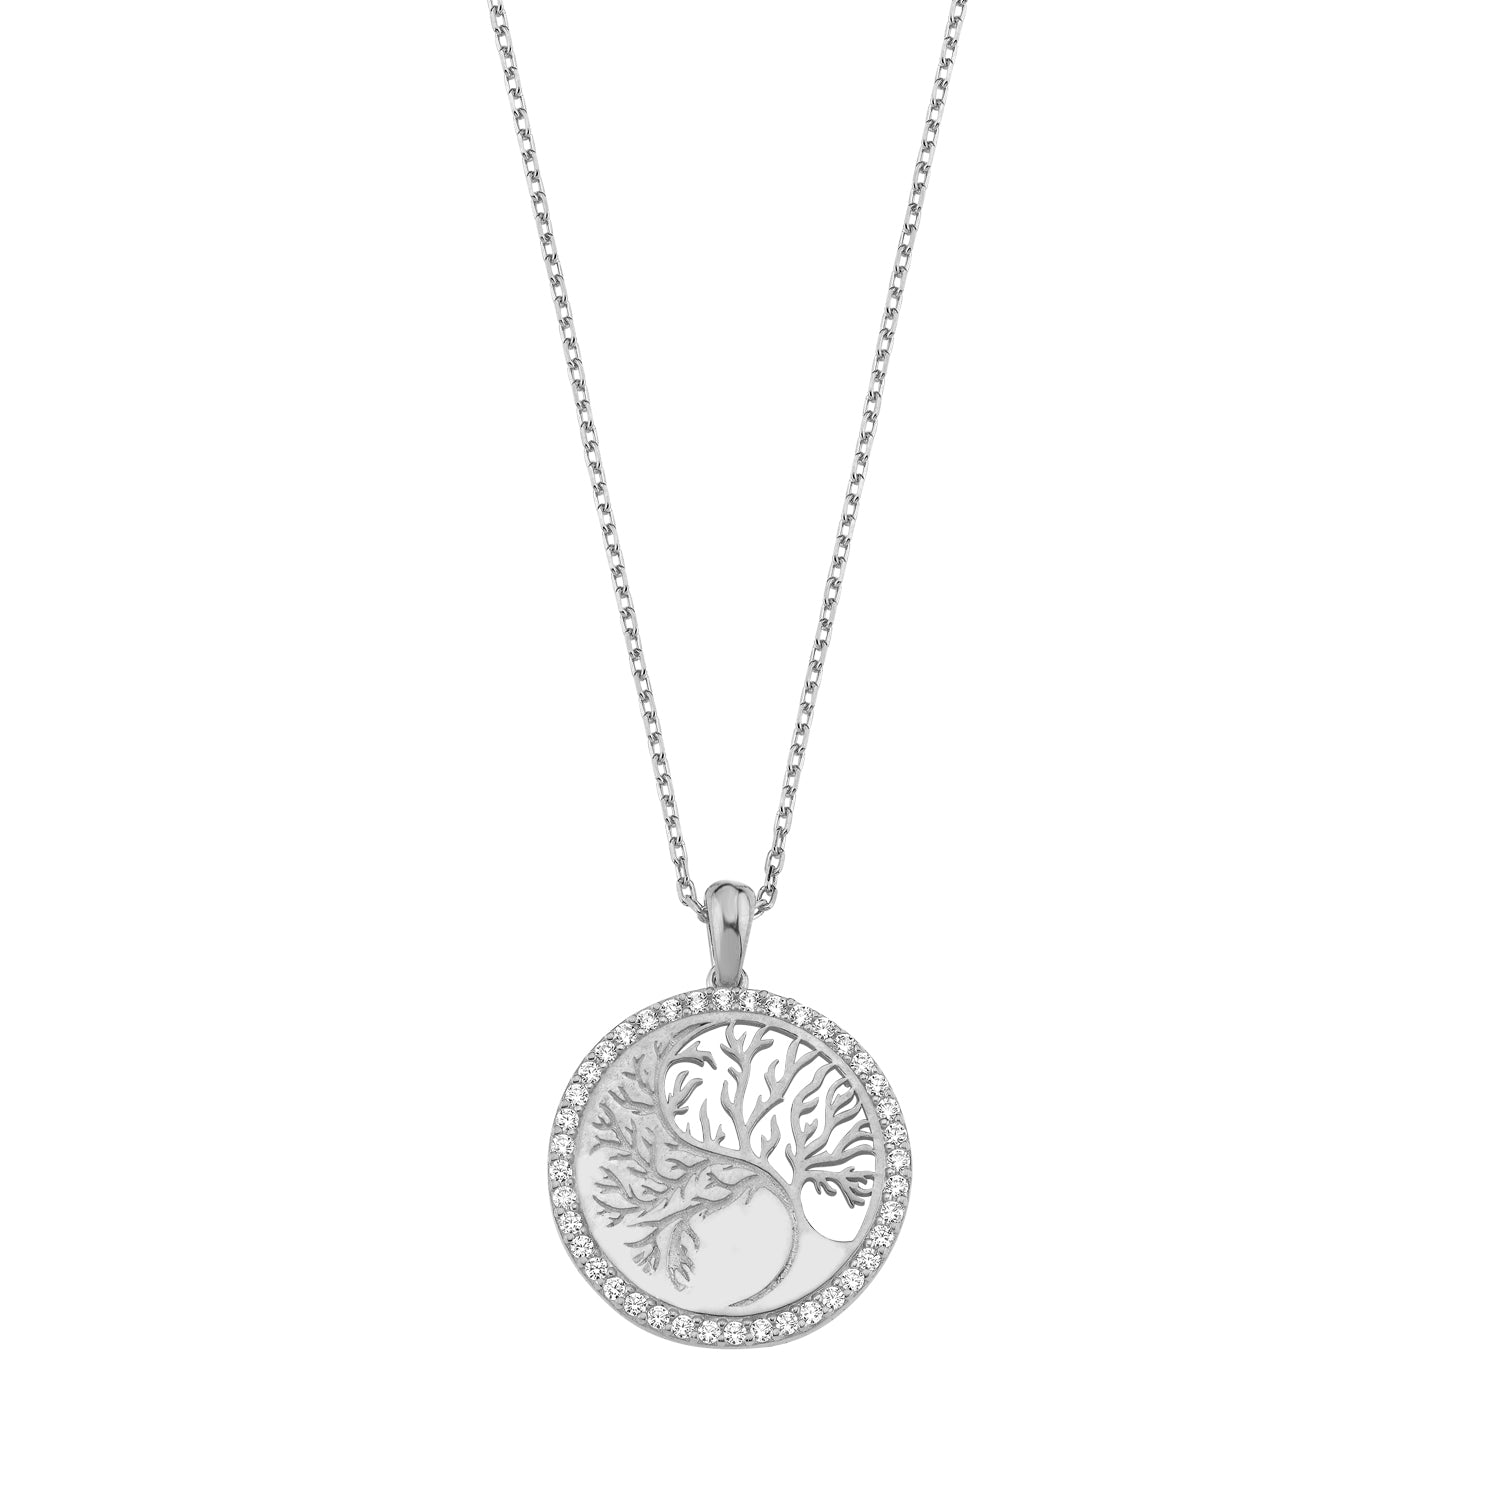 Judgment Tree of Life Necklace